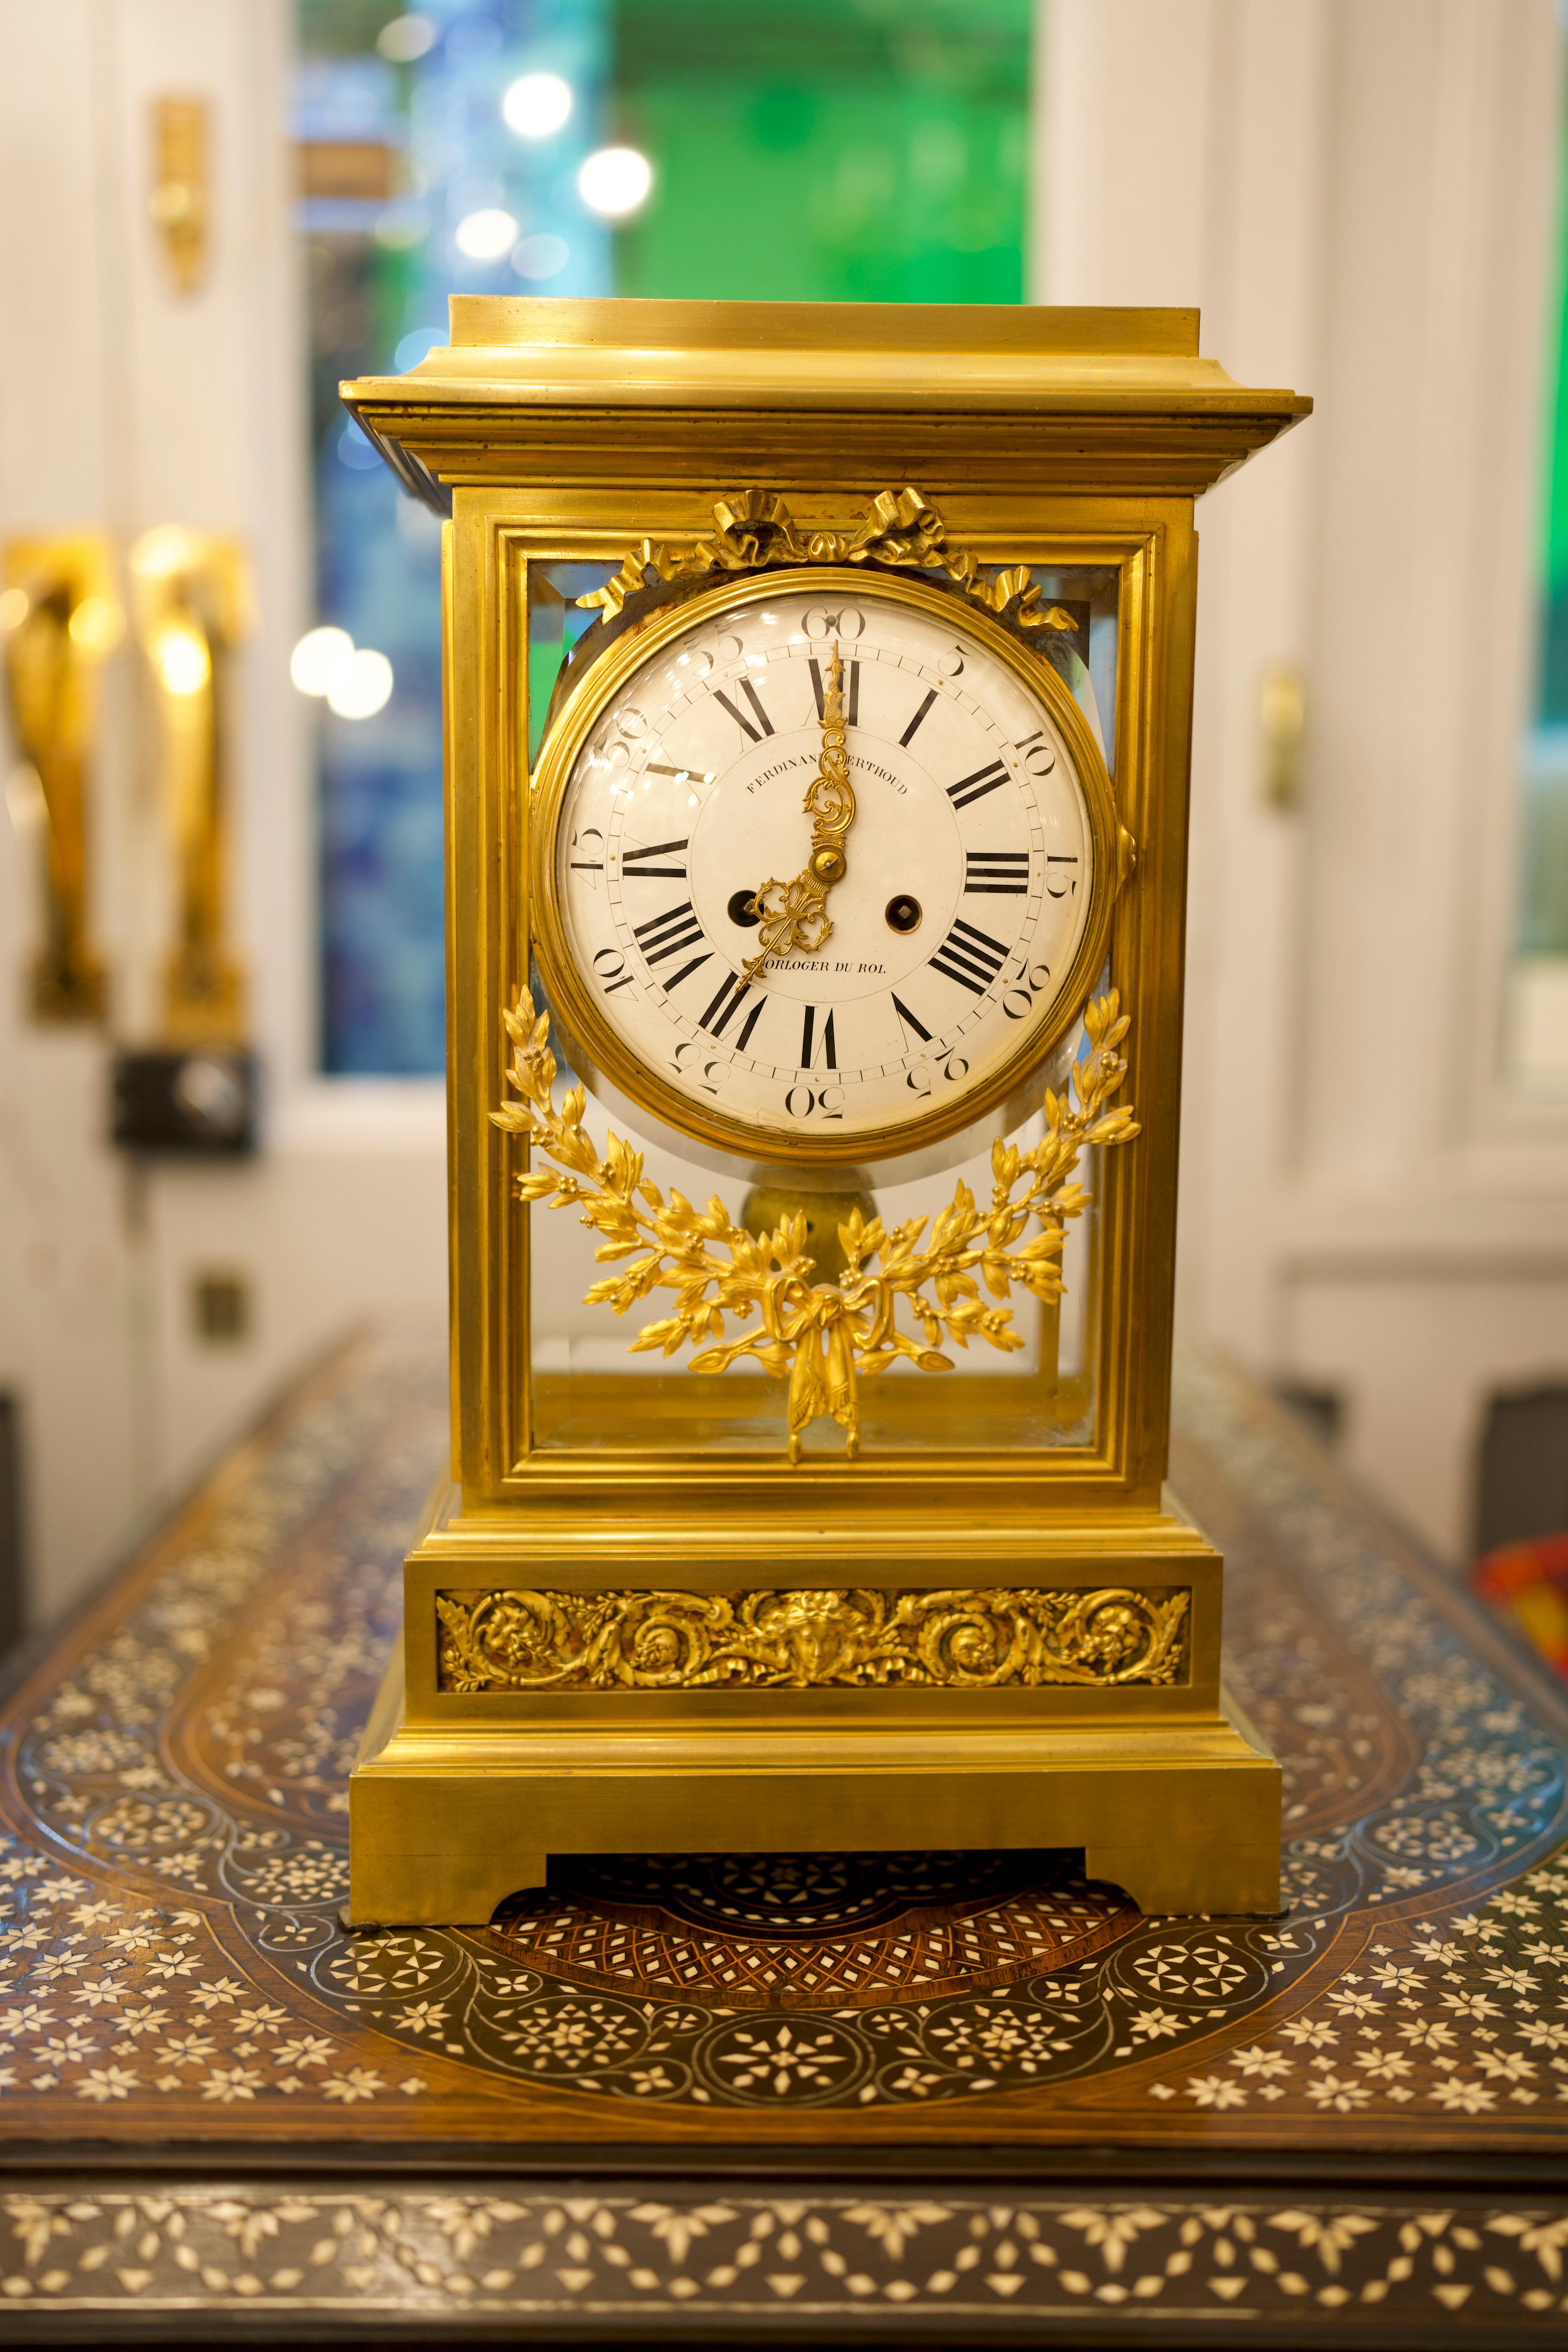 A stunning 19th Century Louis XVI Style Regulator Gilt Bronze clock by Ferdinand Berthoud.
A French Louis XVI style gilt bronze regulator clock, the finely cast rectangular case with four beveled glass sides; the large white enamel dial with Roman